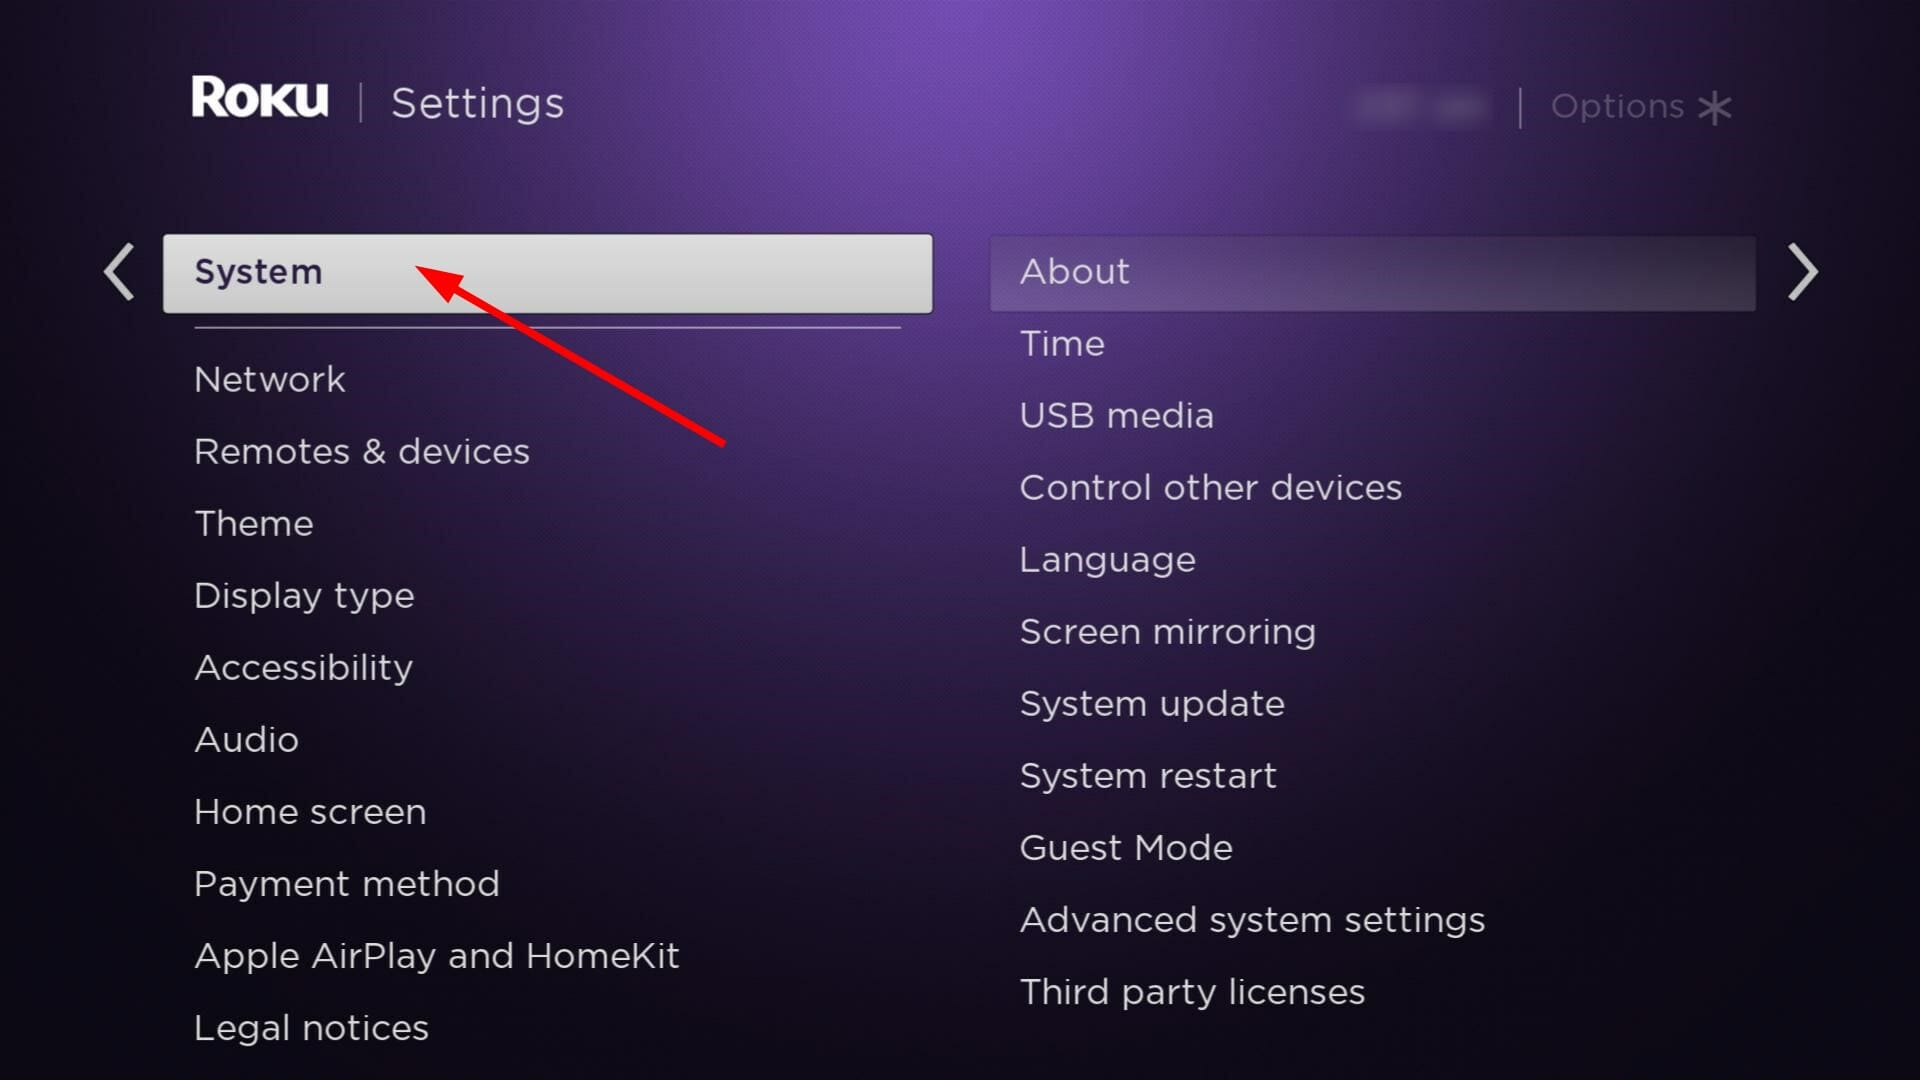 roku connected to W-fi but not working system